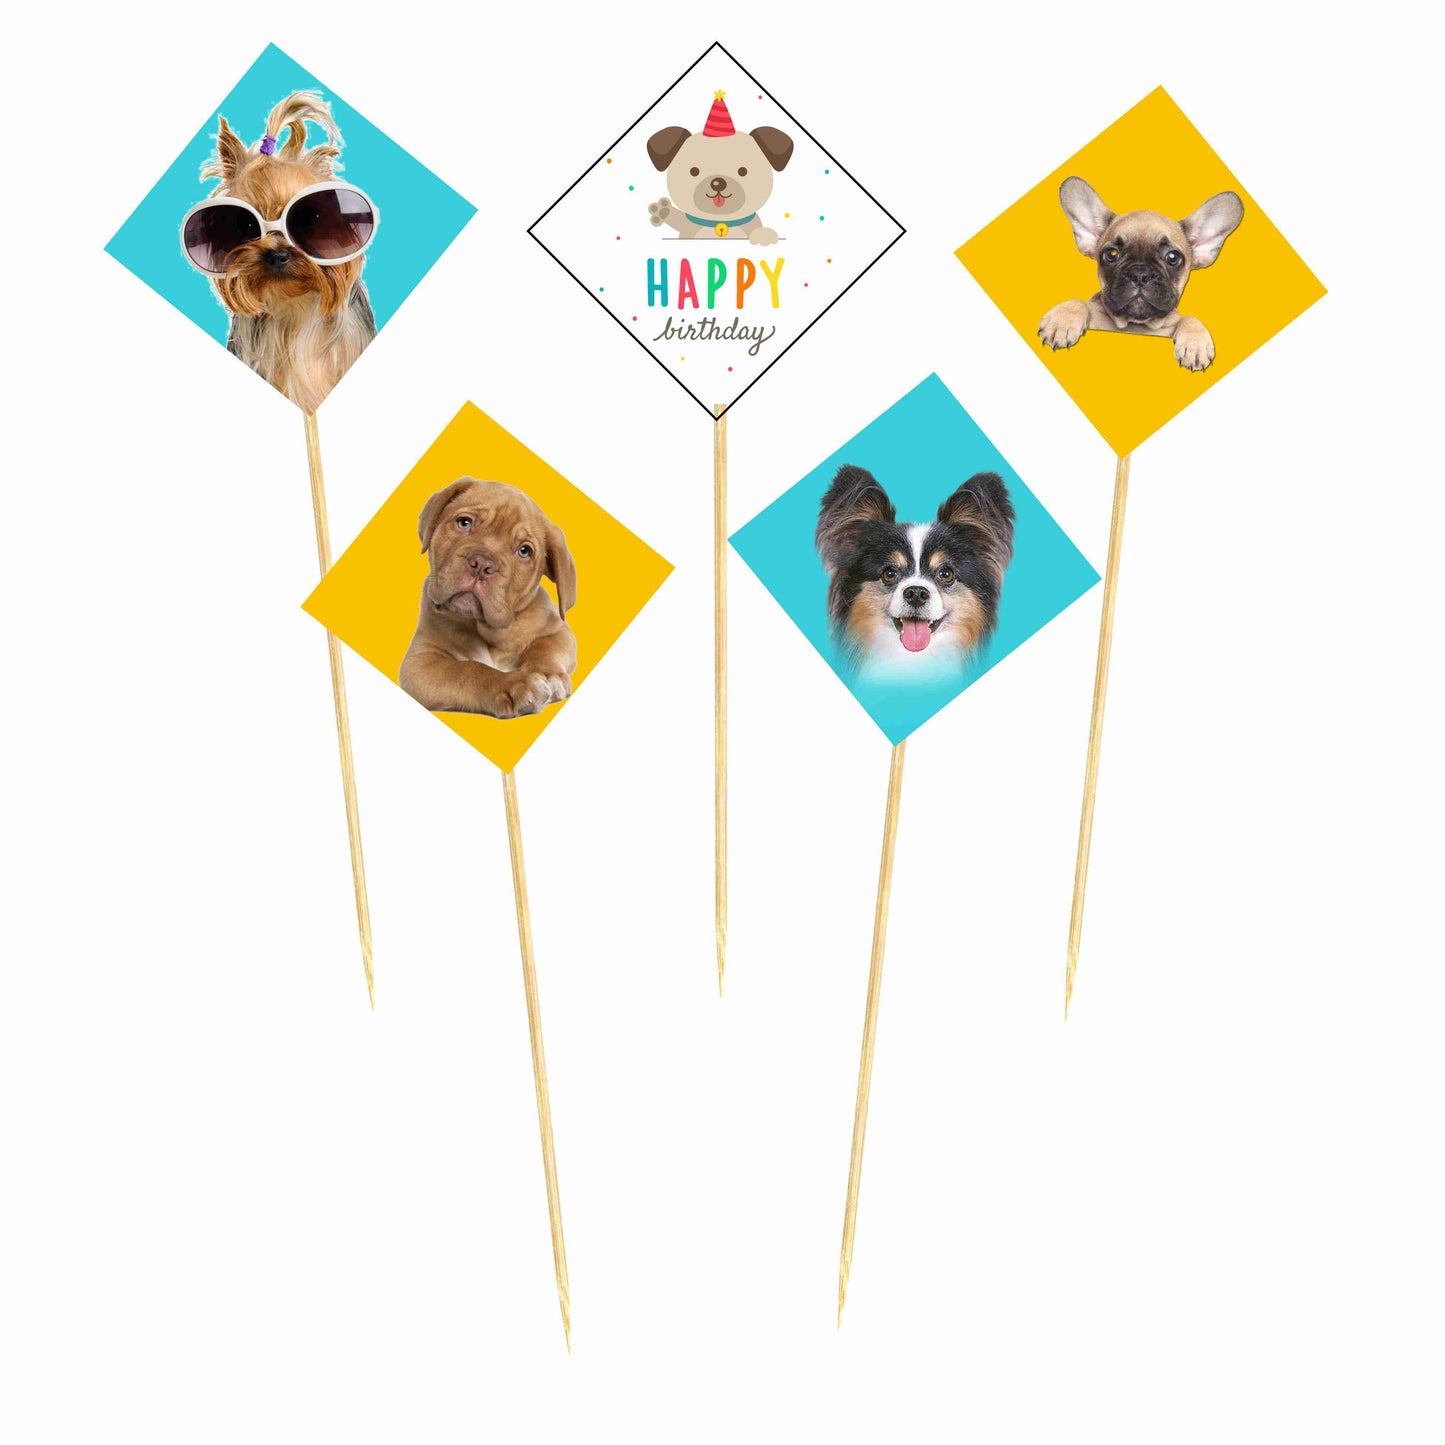 Dog Puppy Theme Cake Topper Pack of 10 Nos for Birthday Cake Decoration Theme Party Item For Boys Girls Adults Birthday Theme Decor